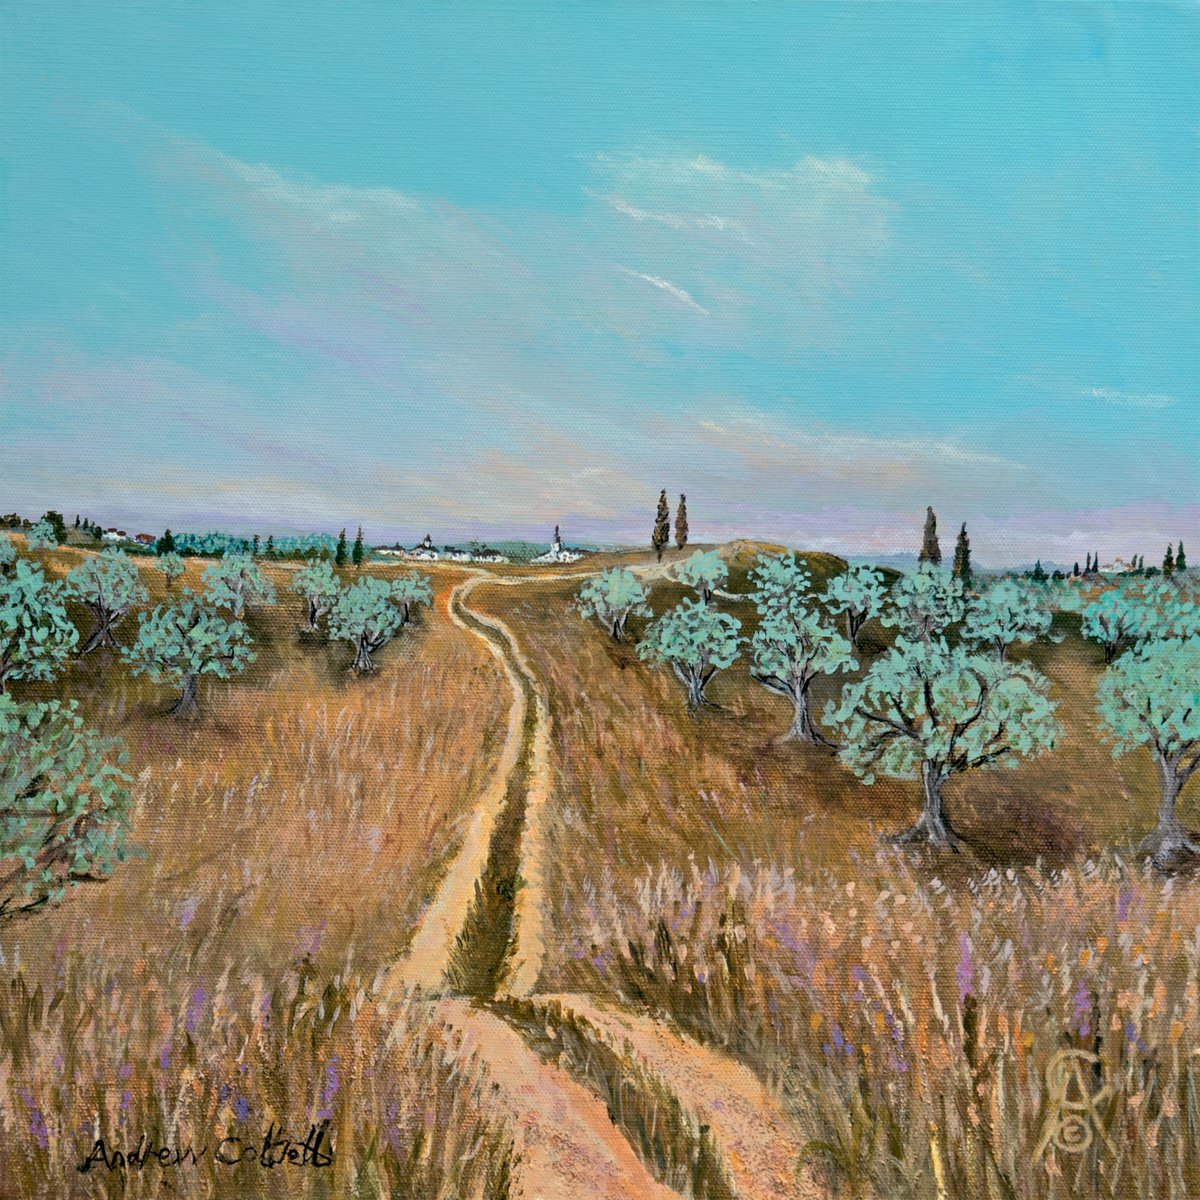 Olive Grove Stroll by Andrew Cottrell